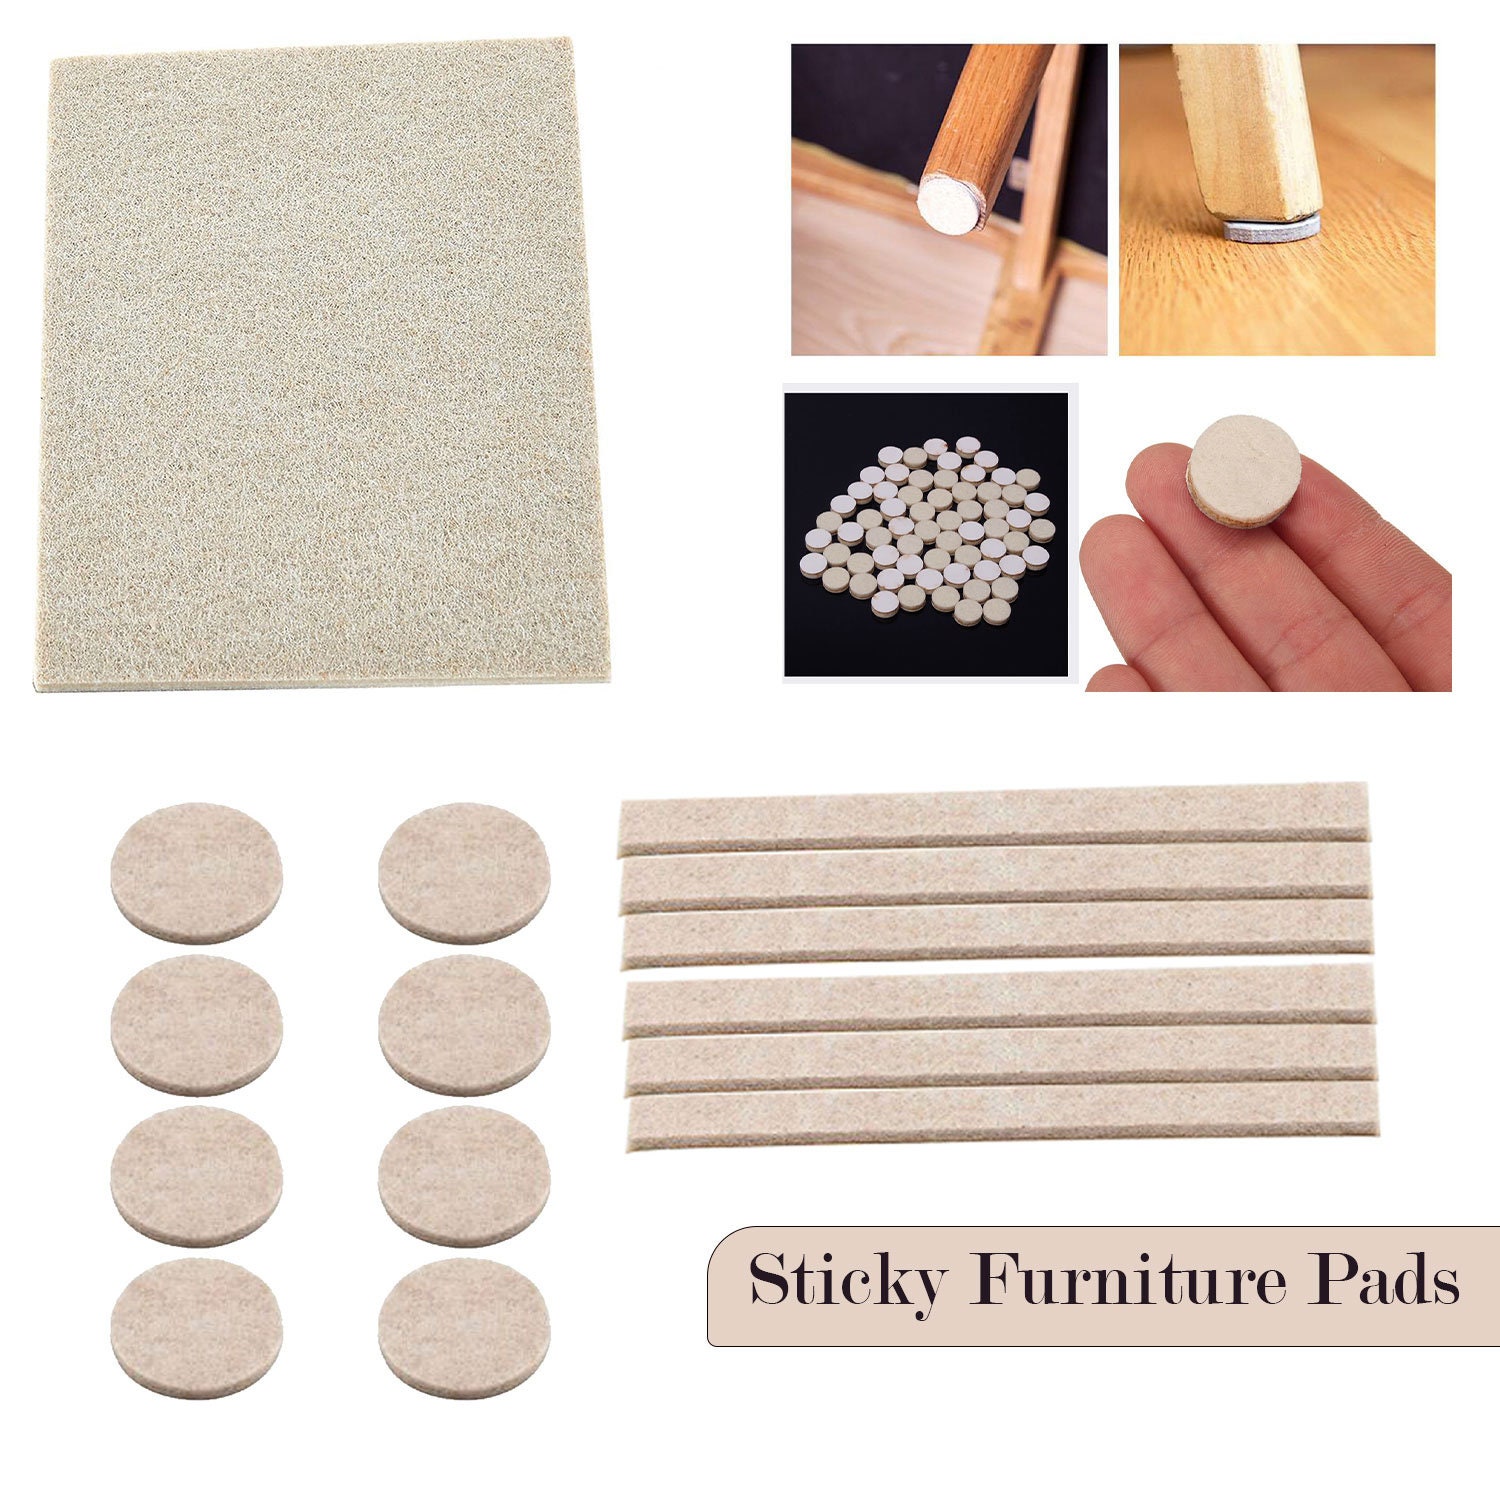 Furniture Pads Floor Protectors Felt Pads for Chair Legs, Rubber Feet for  Door Handle Protect Wood Floors Home Crafts Decoration 